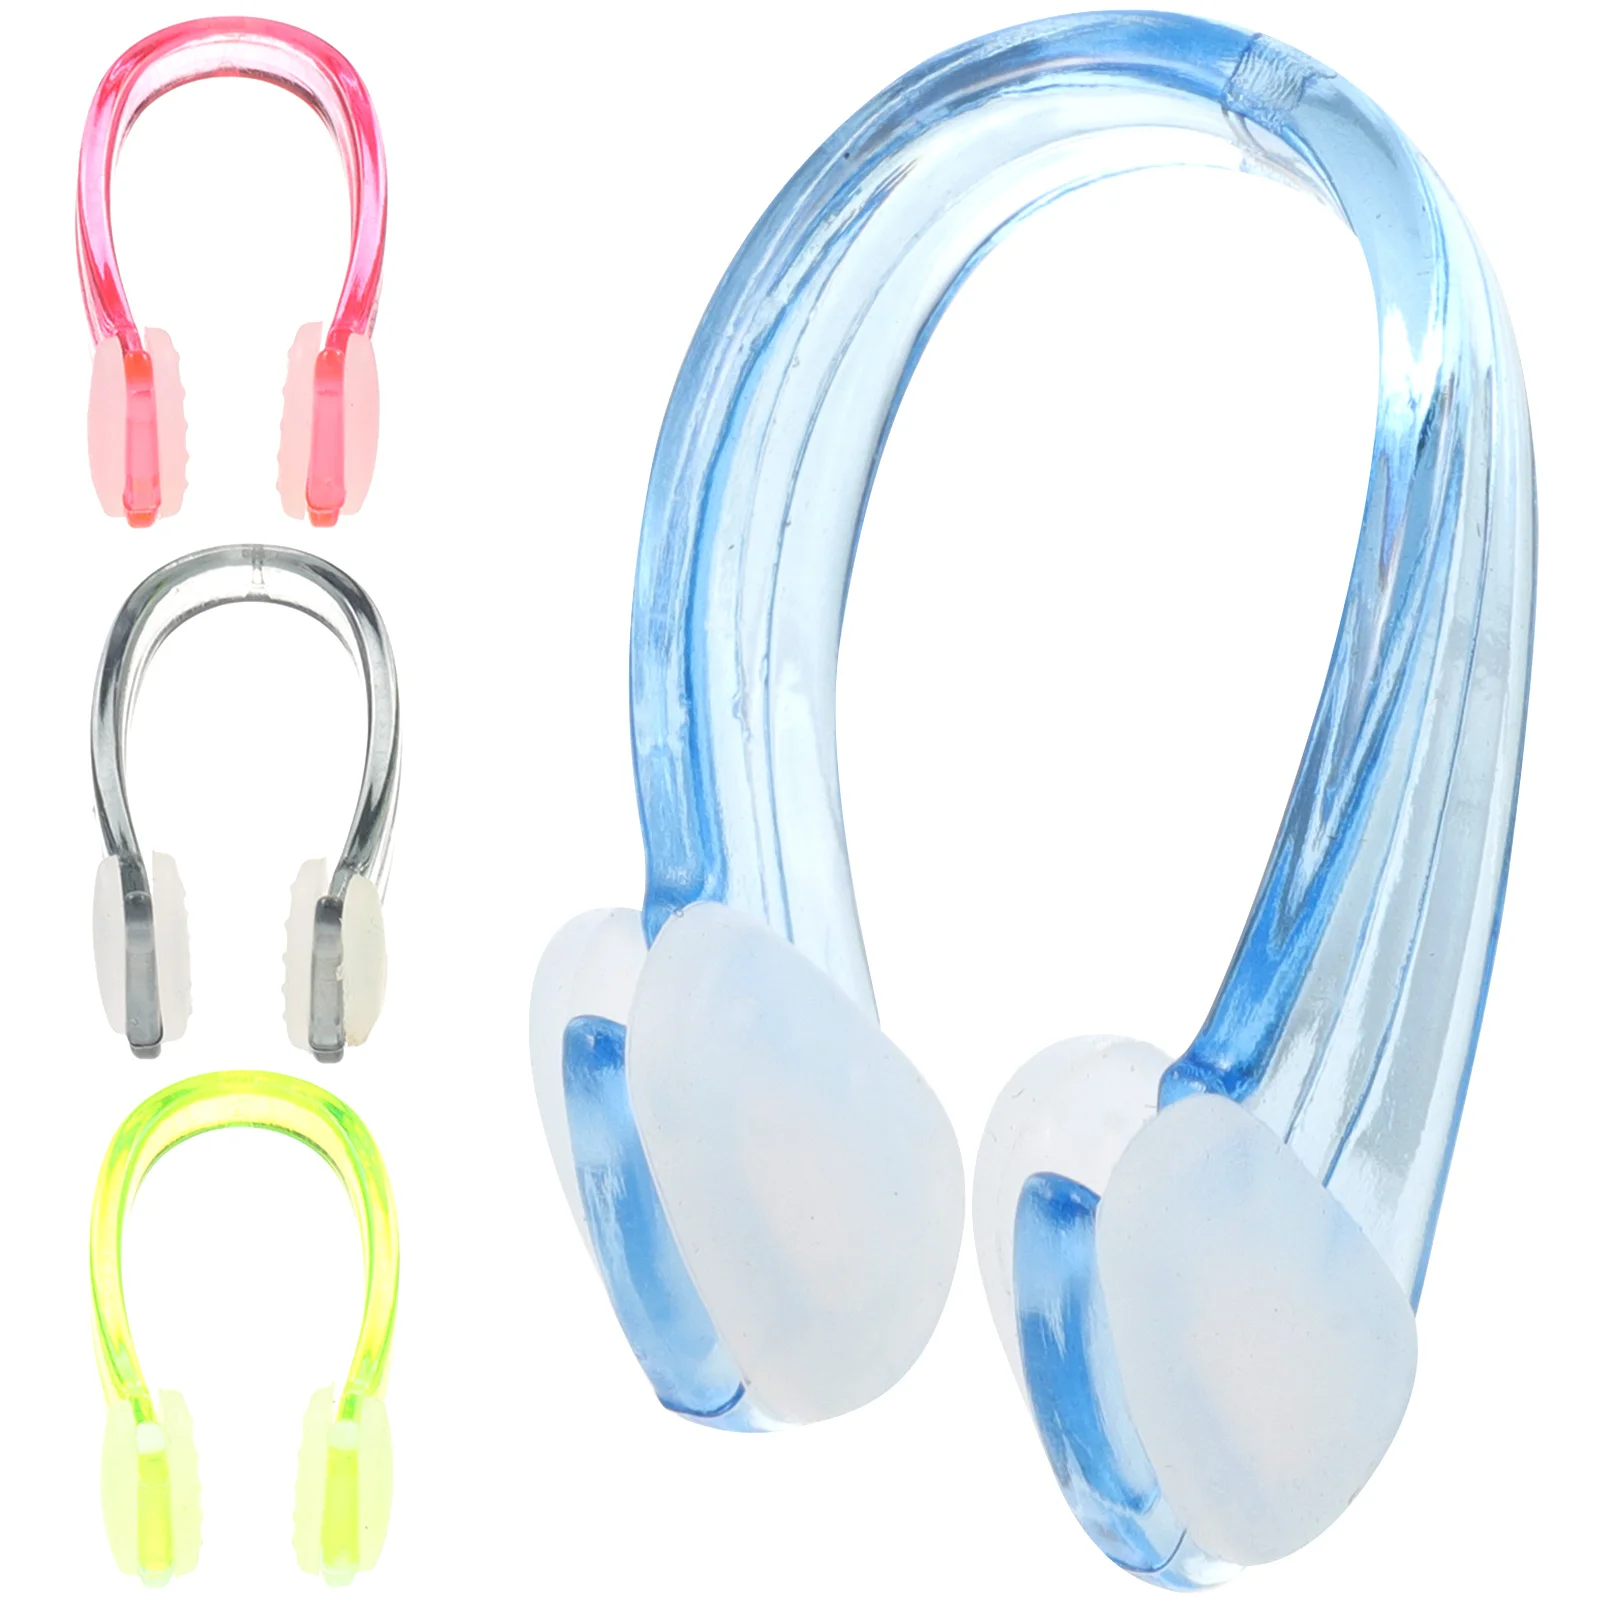 

4 Pcs Swimming Nose Clip Ear Plugs Kids Clips Children Diving Adult Accessories Anti-skid Nonskid